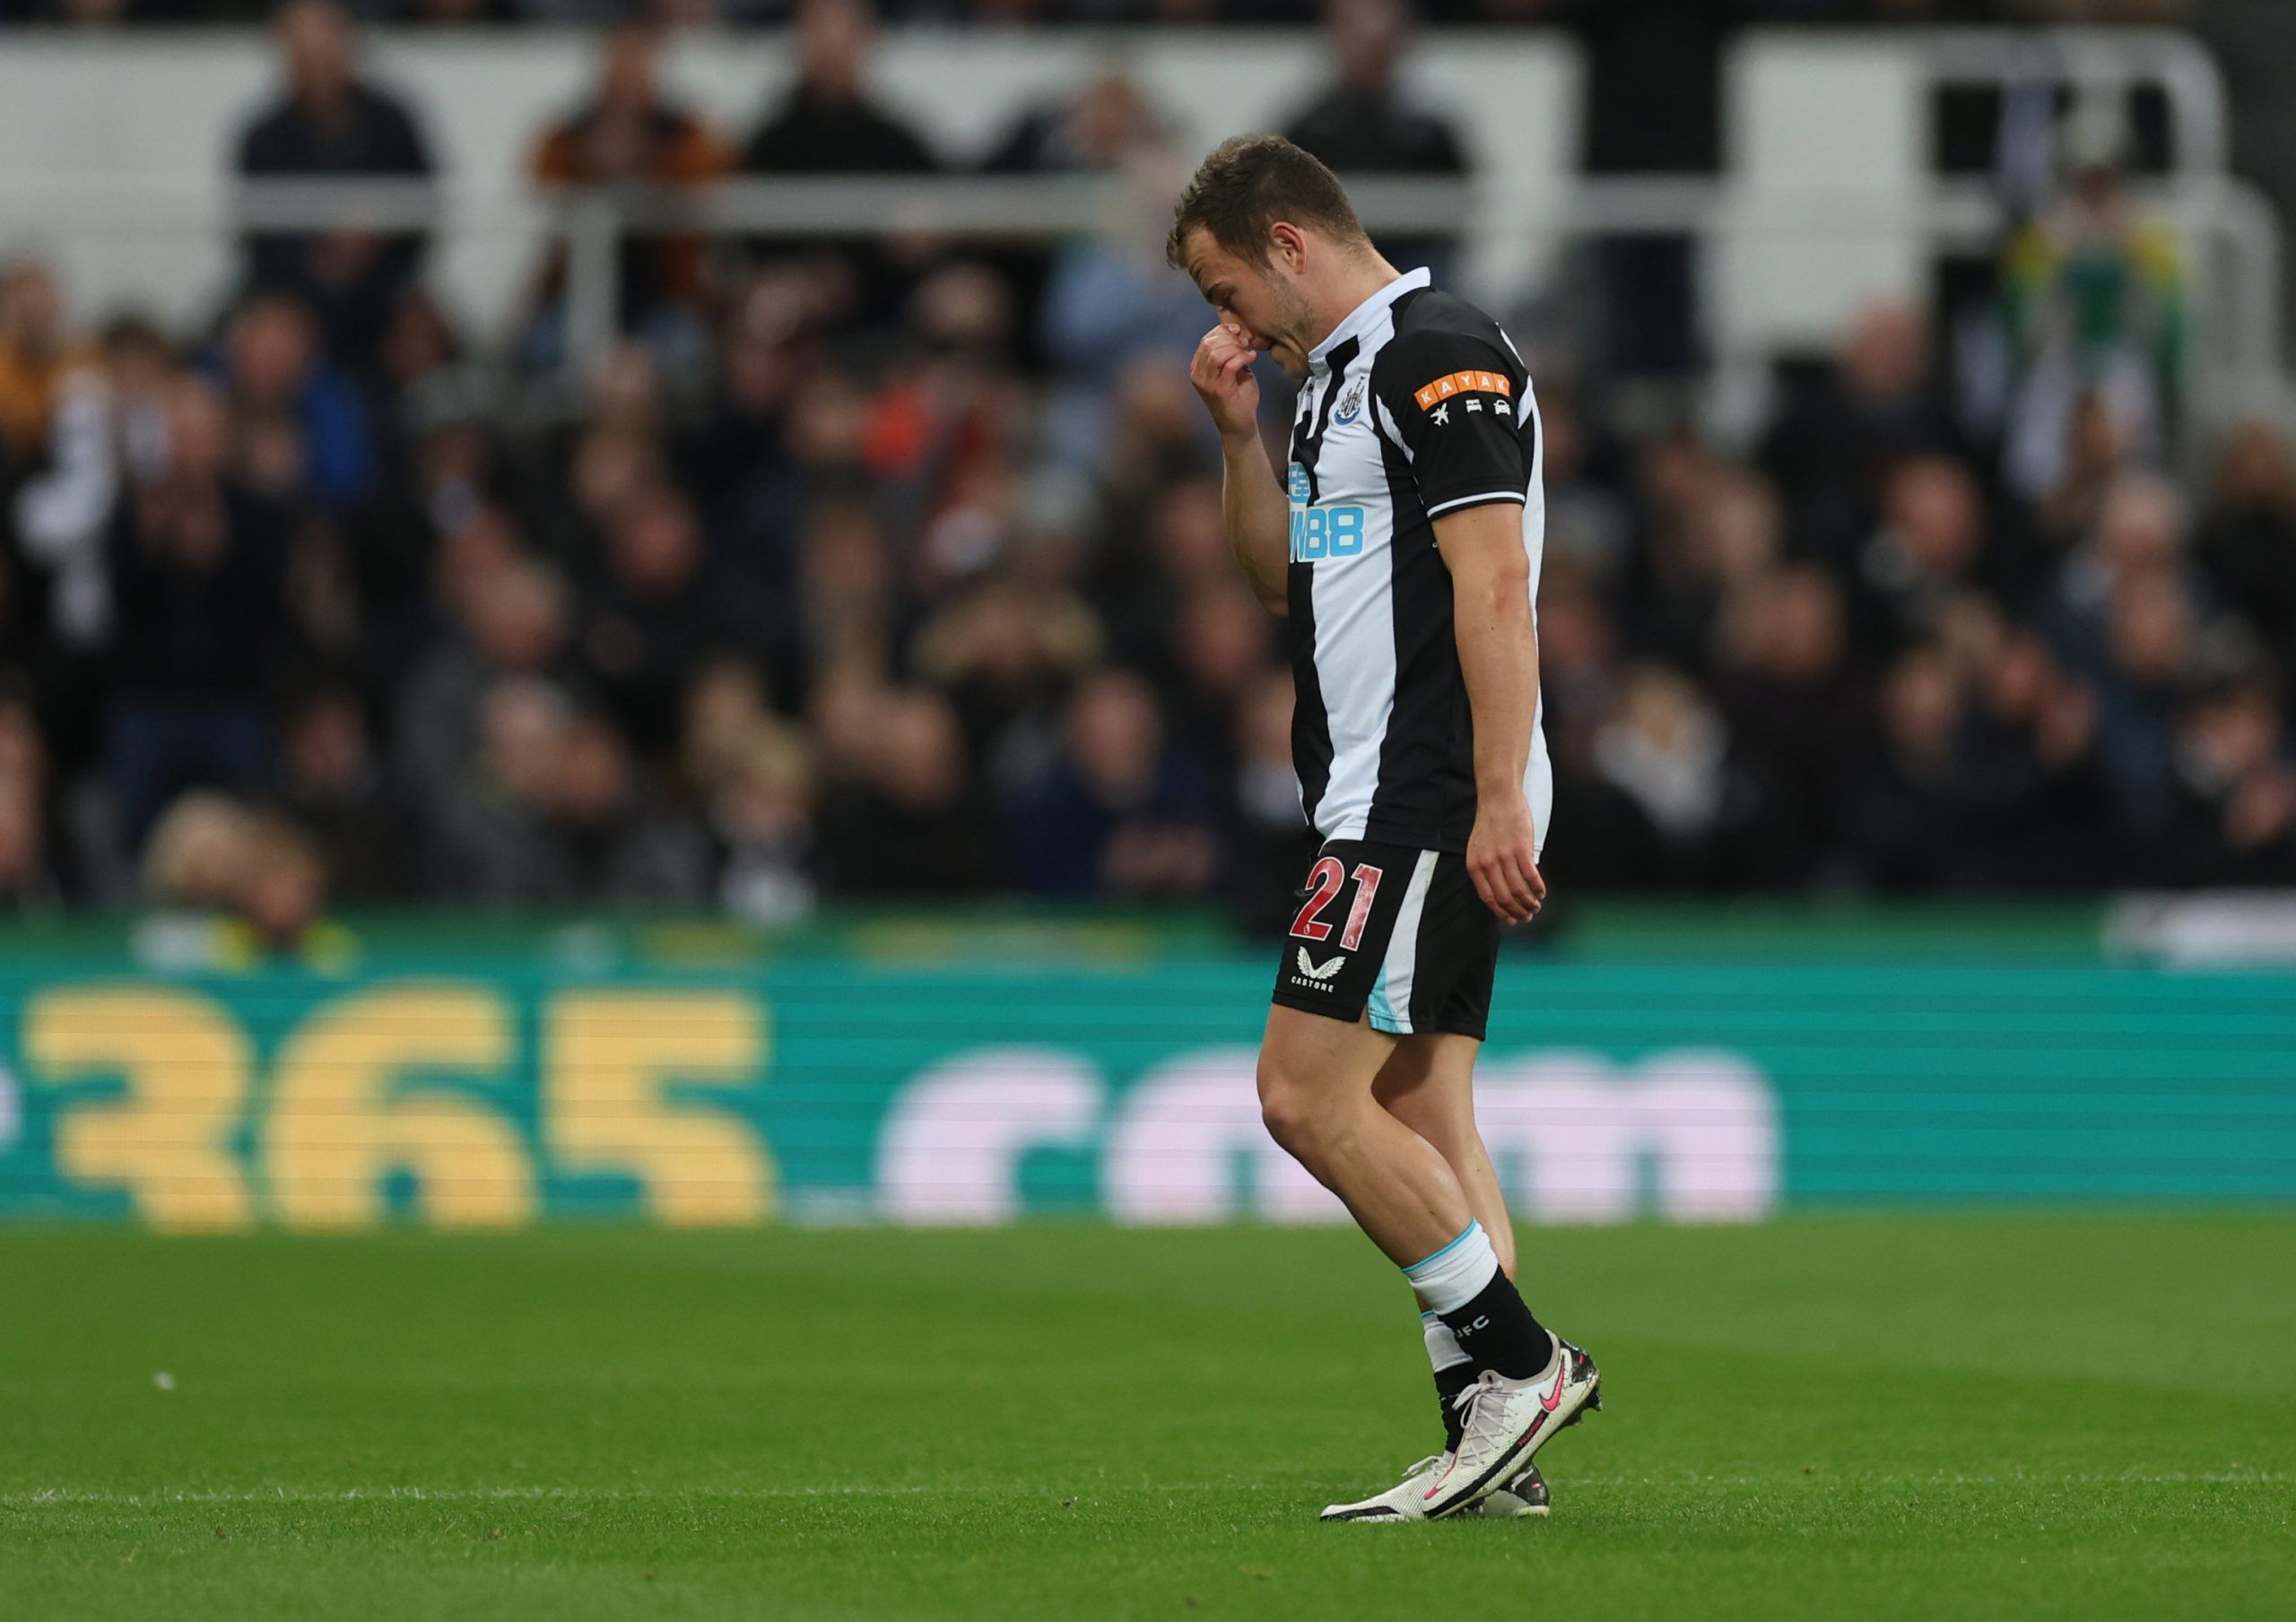 Soccer Football - Premier League - Newcastle United v Wolverhampton Wanderers - St James' Park, Newcastle, Britain - April 8, 2022  Newcastle United's Ryan Fraser walks off the pitch dejected after sustaining an injury Action Images via Reuters/Lee Smith EDITORIAL USE ONLY. No use with unauthorized audio, video, data, fixture lists, club/league logos or 'live' services. Online in-match use limited to 75 images, no video emulation. No use in betting, games or single club /league/player publicatio